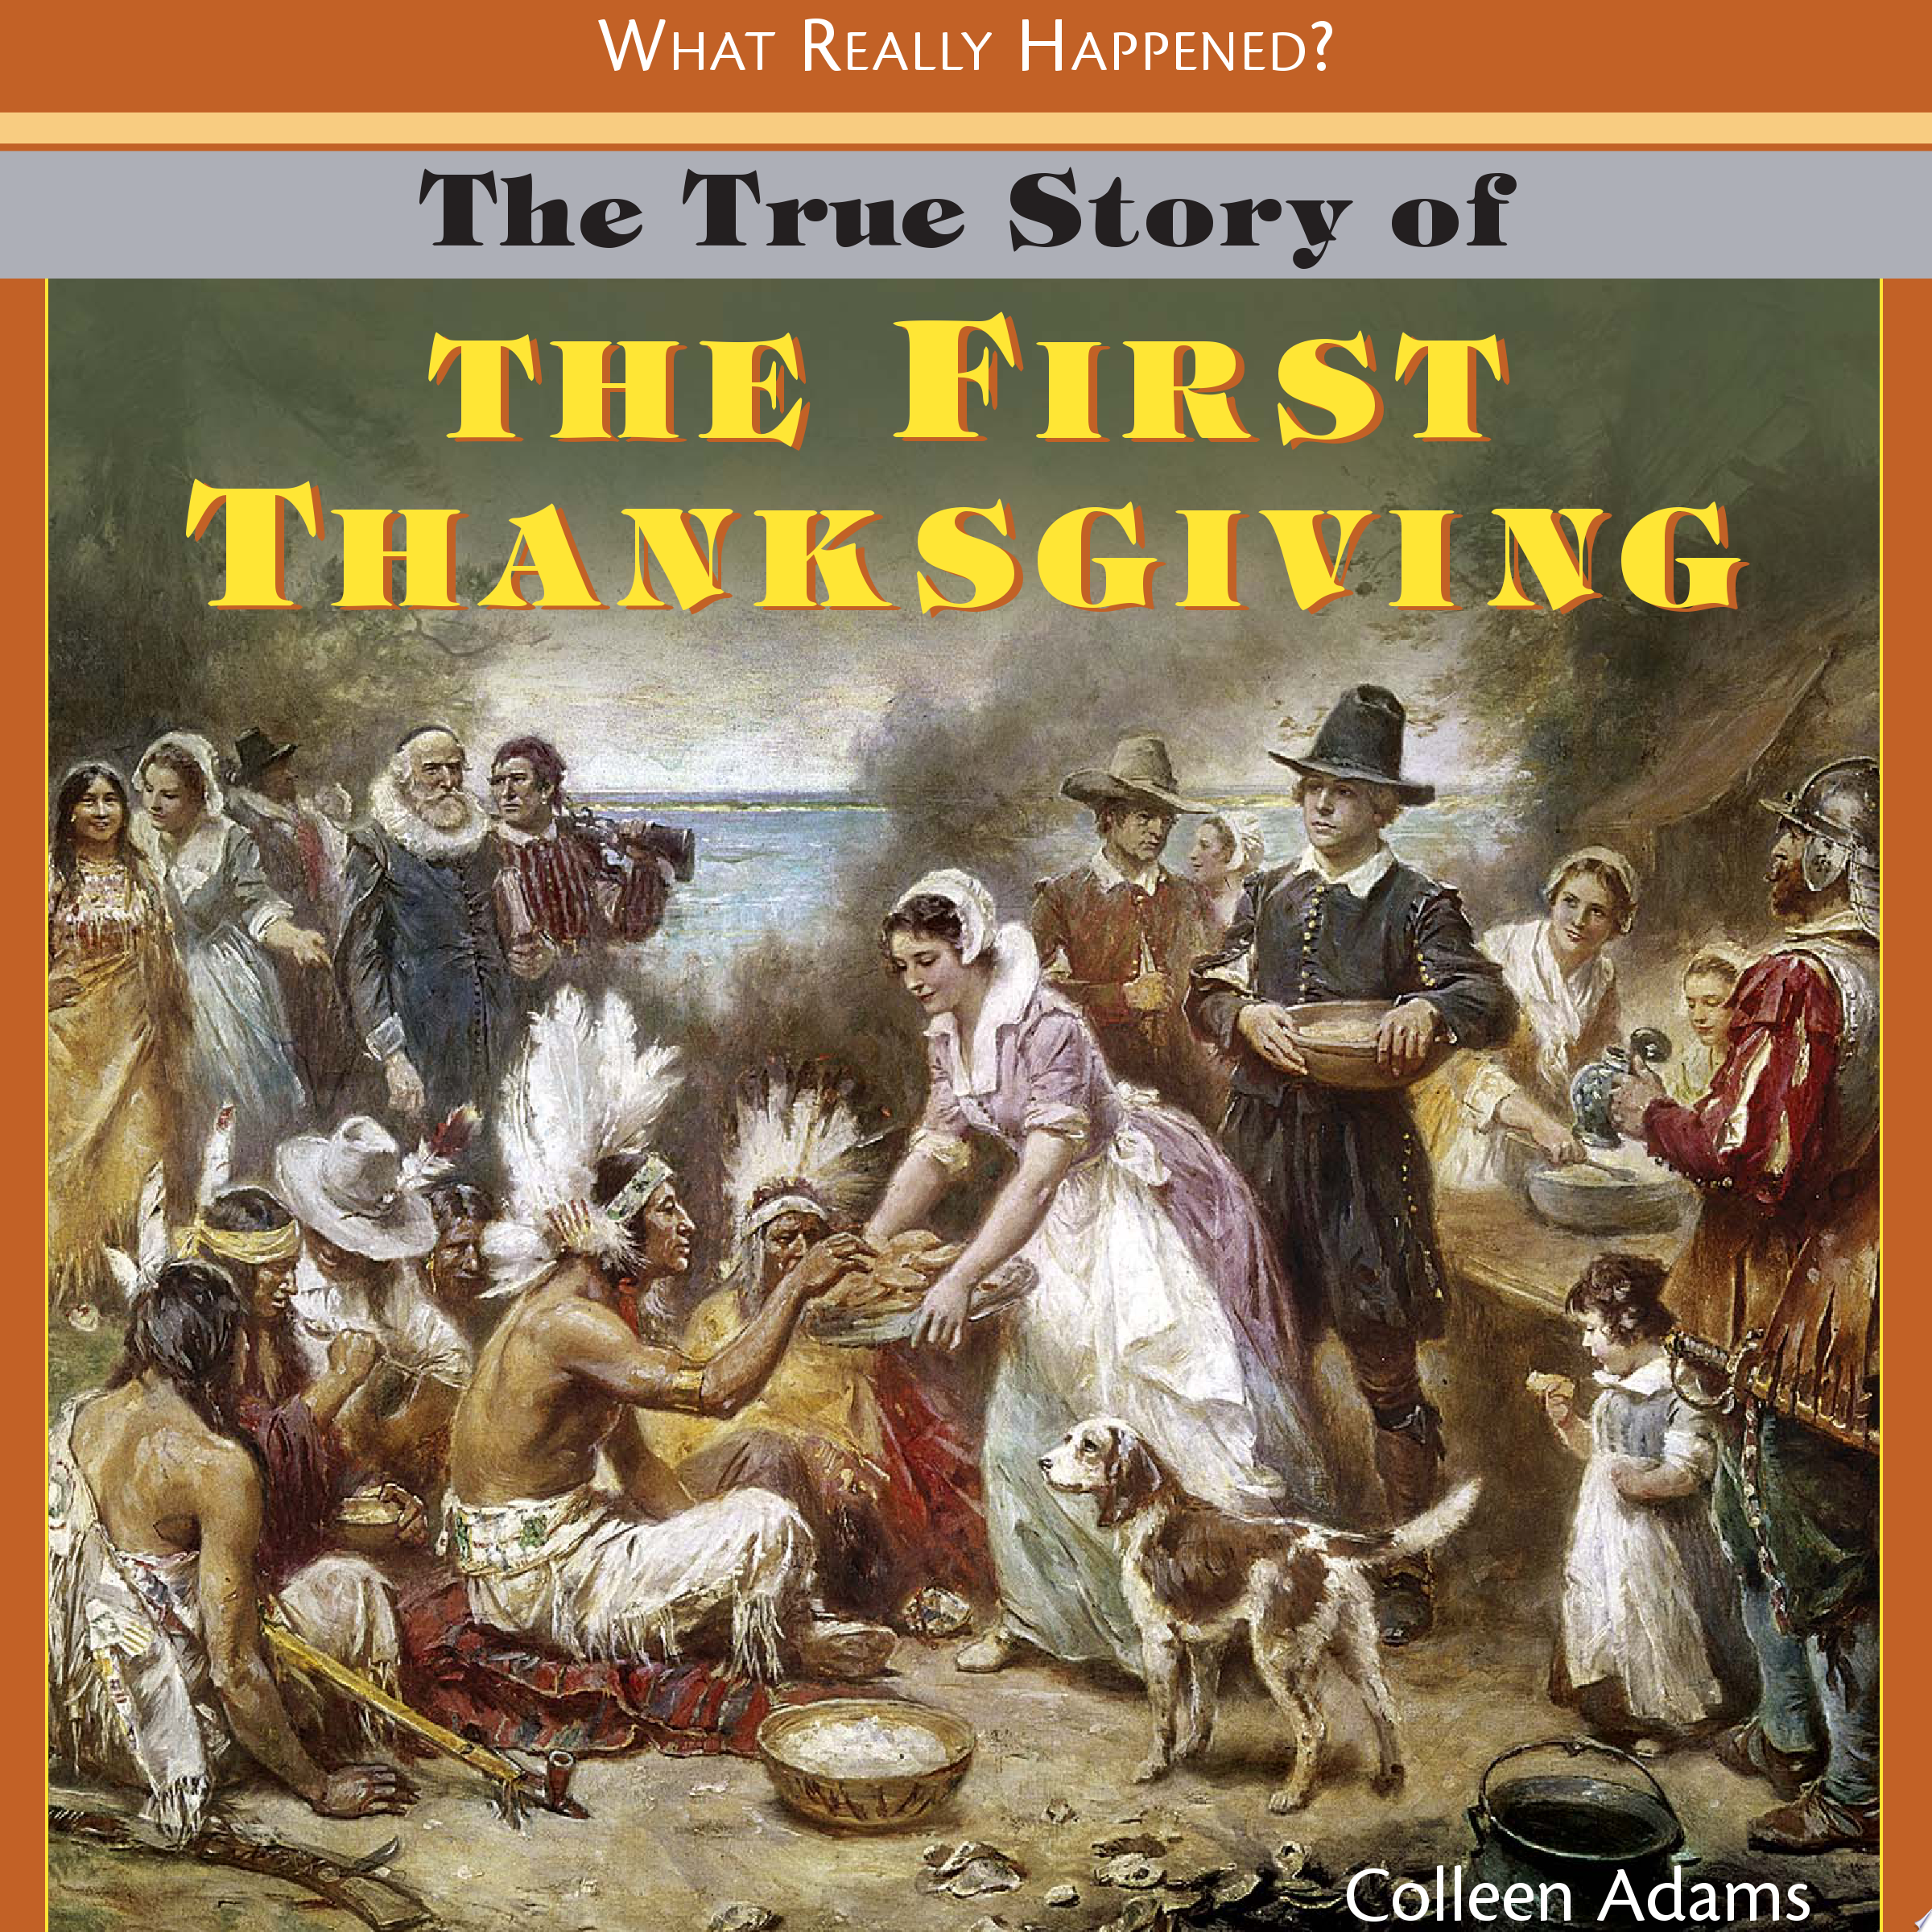 Image for "The True Story of the First Thanksgiving"